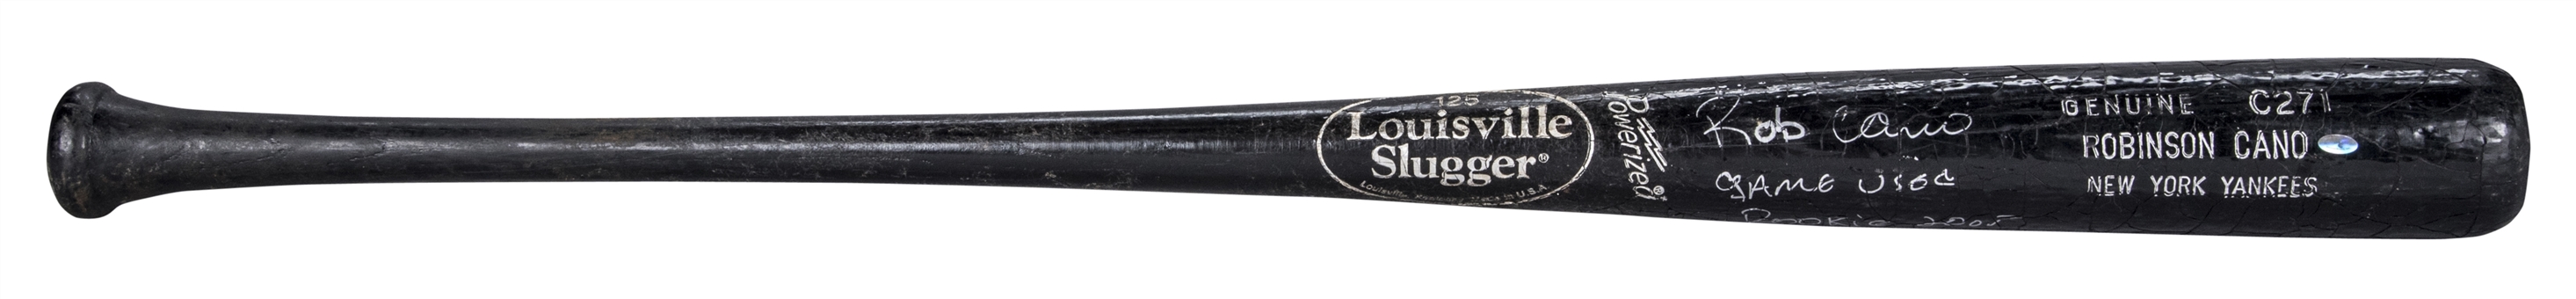 2005 Robinson Cano Rookie Game Used, Signed & Inscribed Louisville Slugger C271 Model Bat (PSA/DNA)